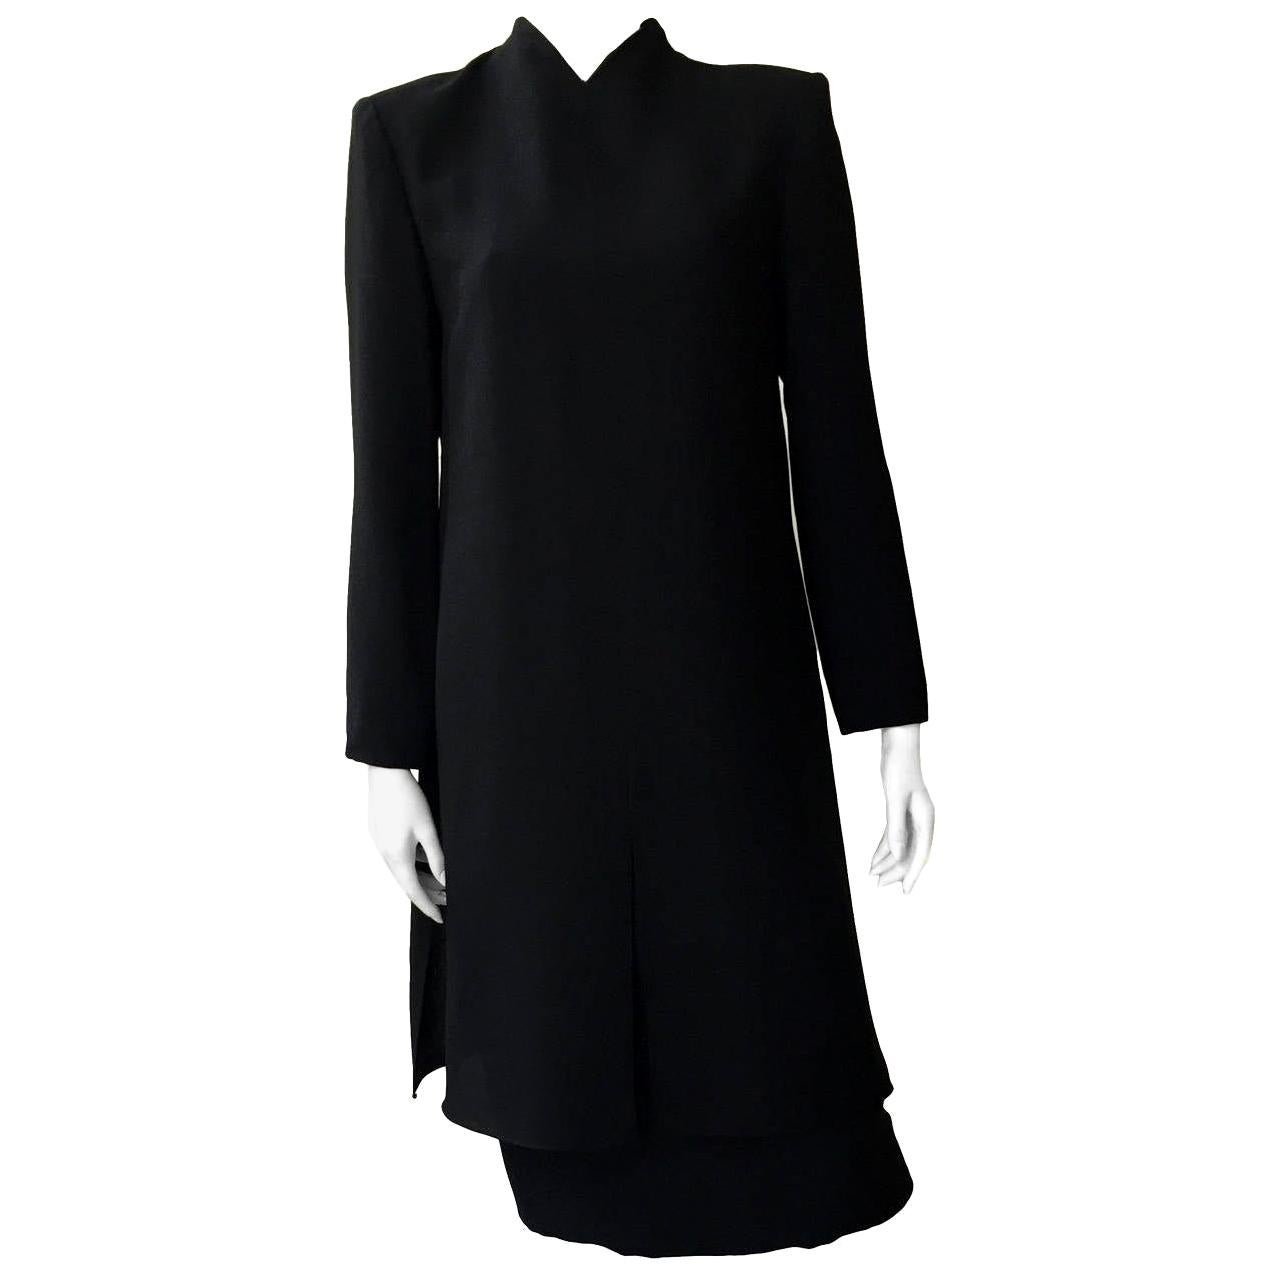 Travilla 1970sBlack Layered Wool Dress Size 12. For Sale